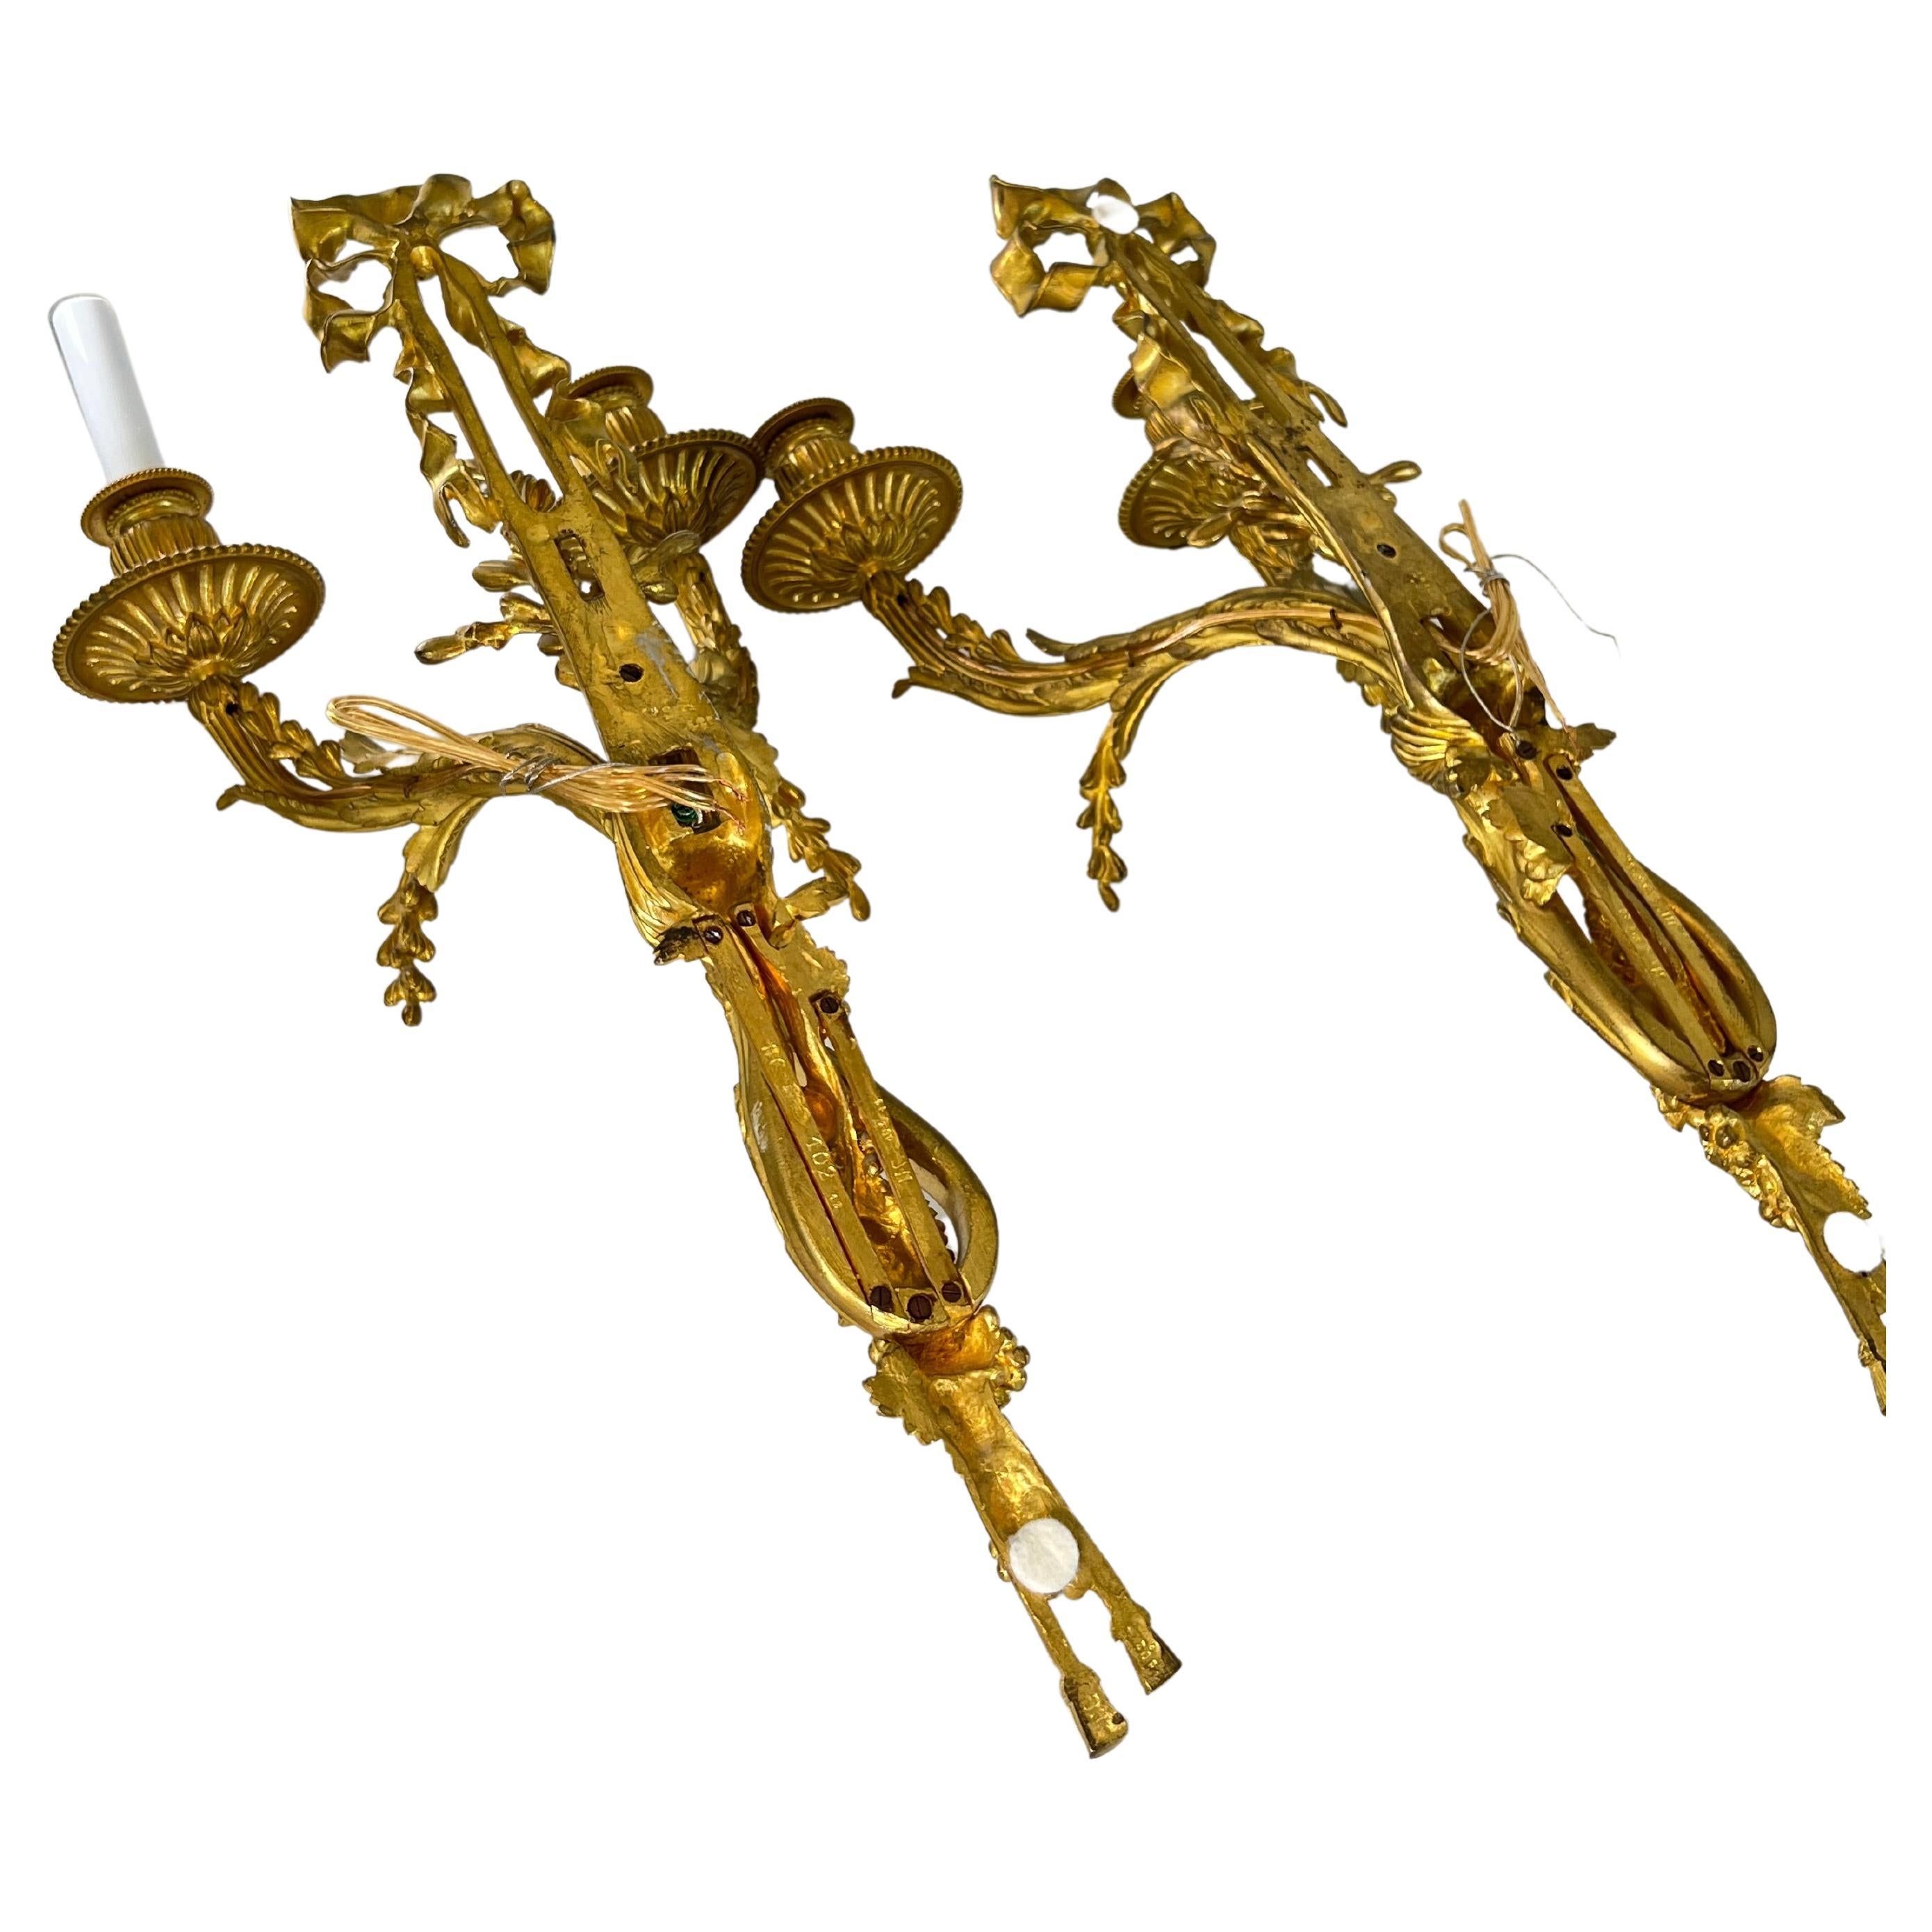 Rare pair of finely chiseled matte and shiny gilt bronze sconces. An imposing tied ribbon overhangs the sconces. A knotted link is in the center from which two berry branches come out. the bs of the sconce end with two pompoms. Along the shaft